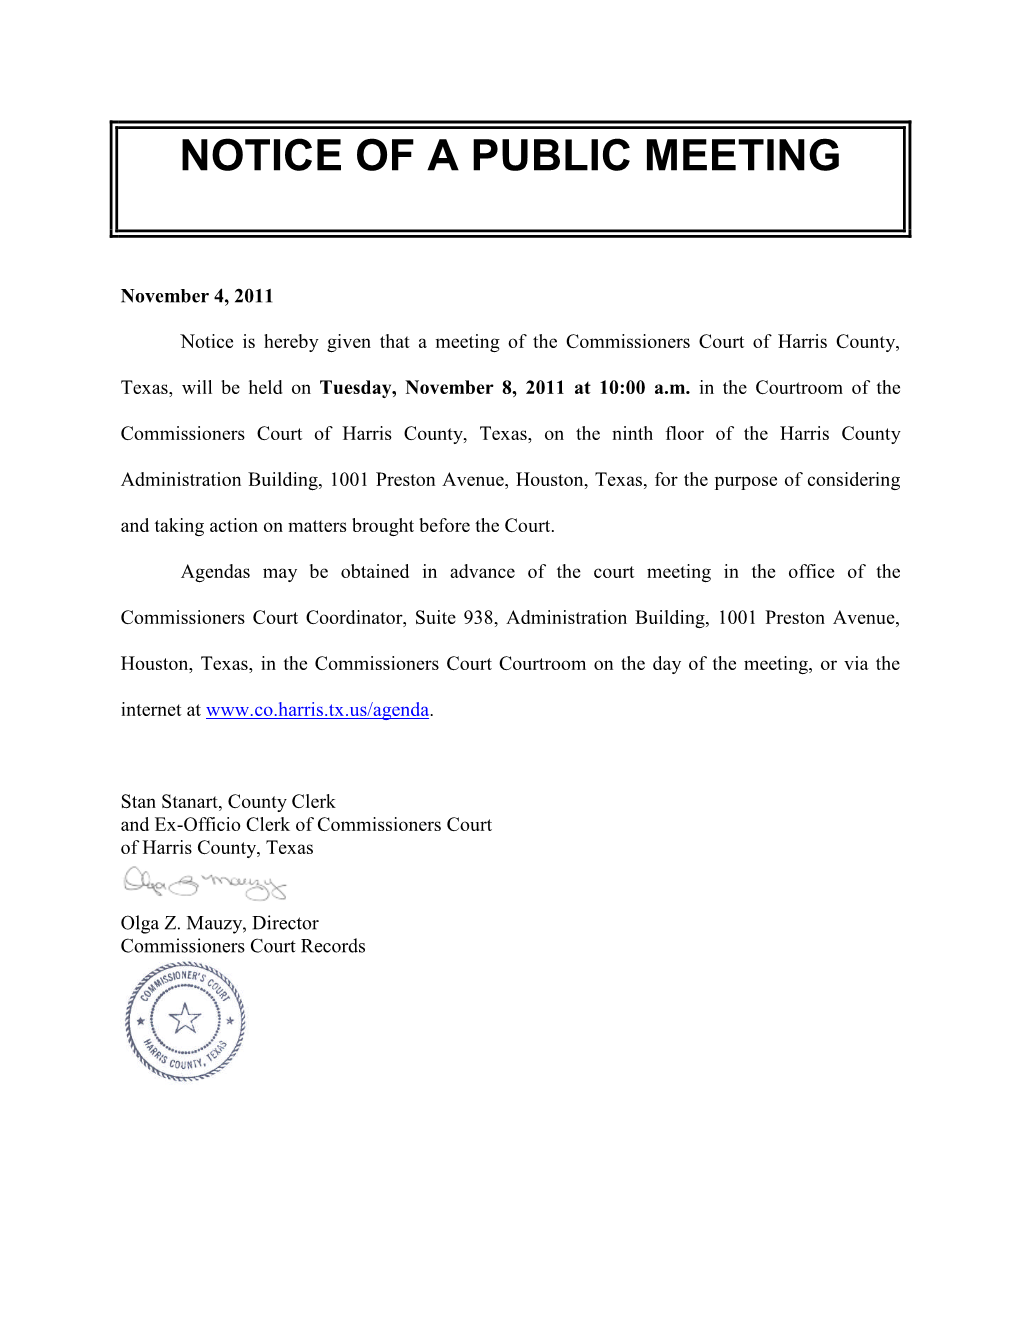 Notice of a Public Meeting